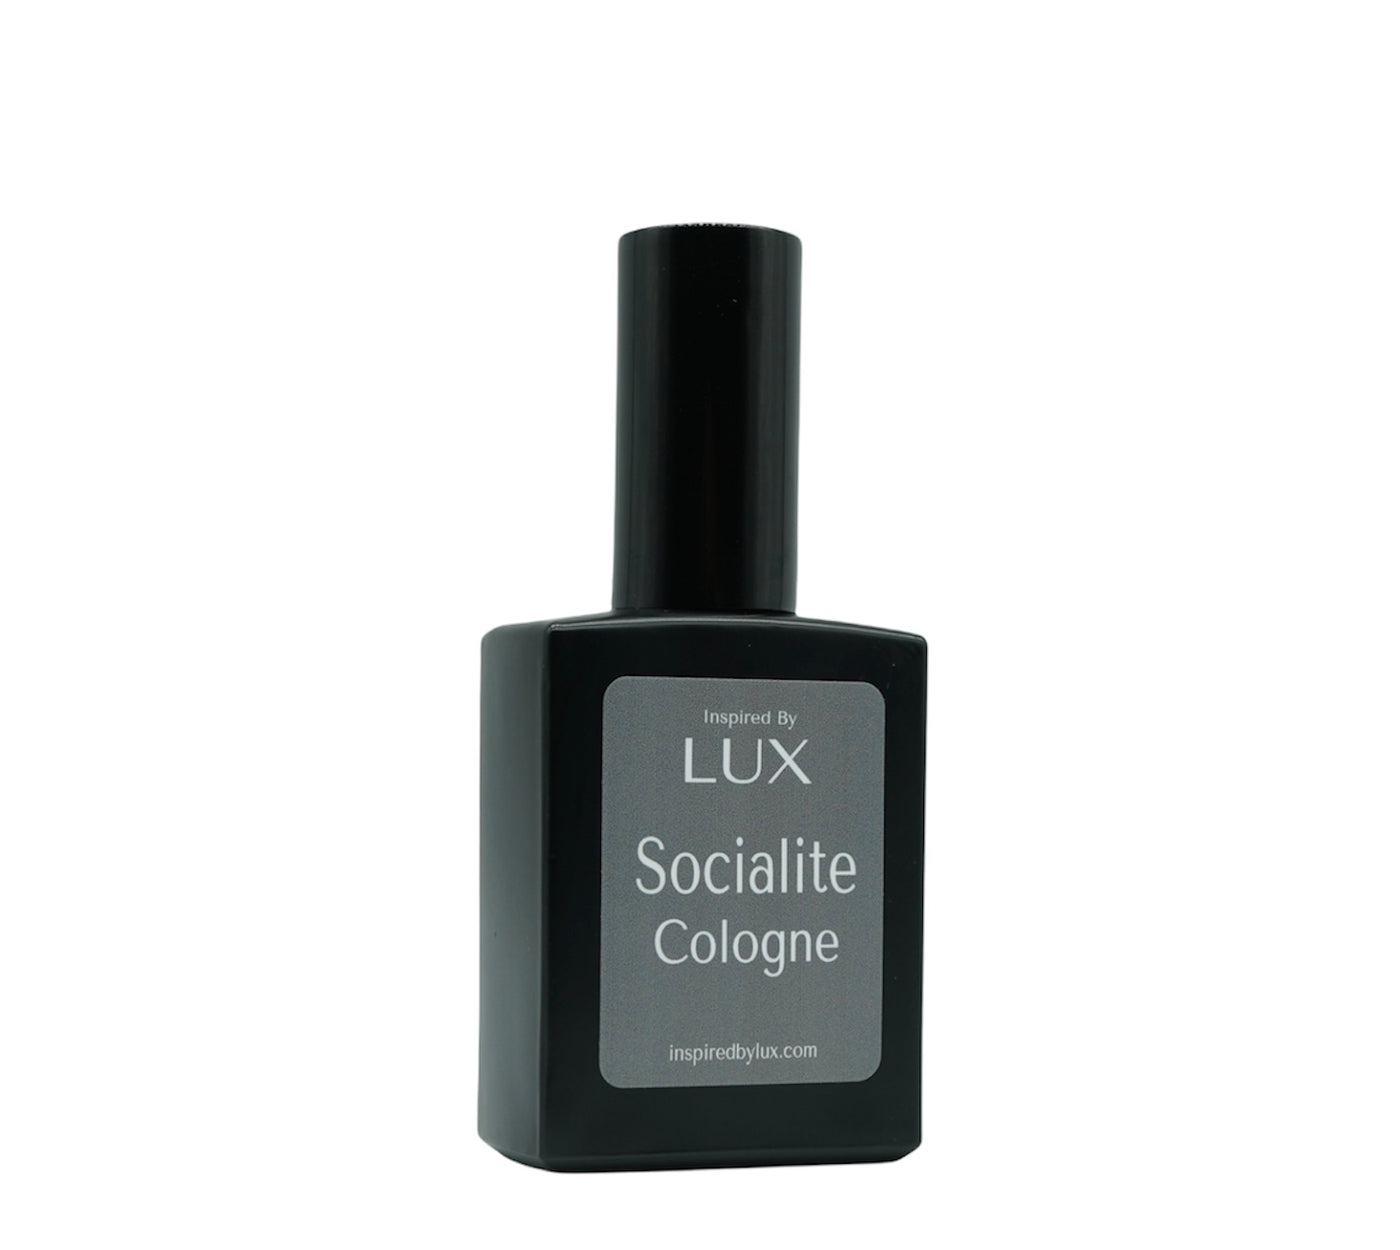 inspired by lux socialite cologne